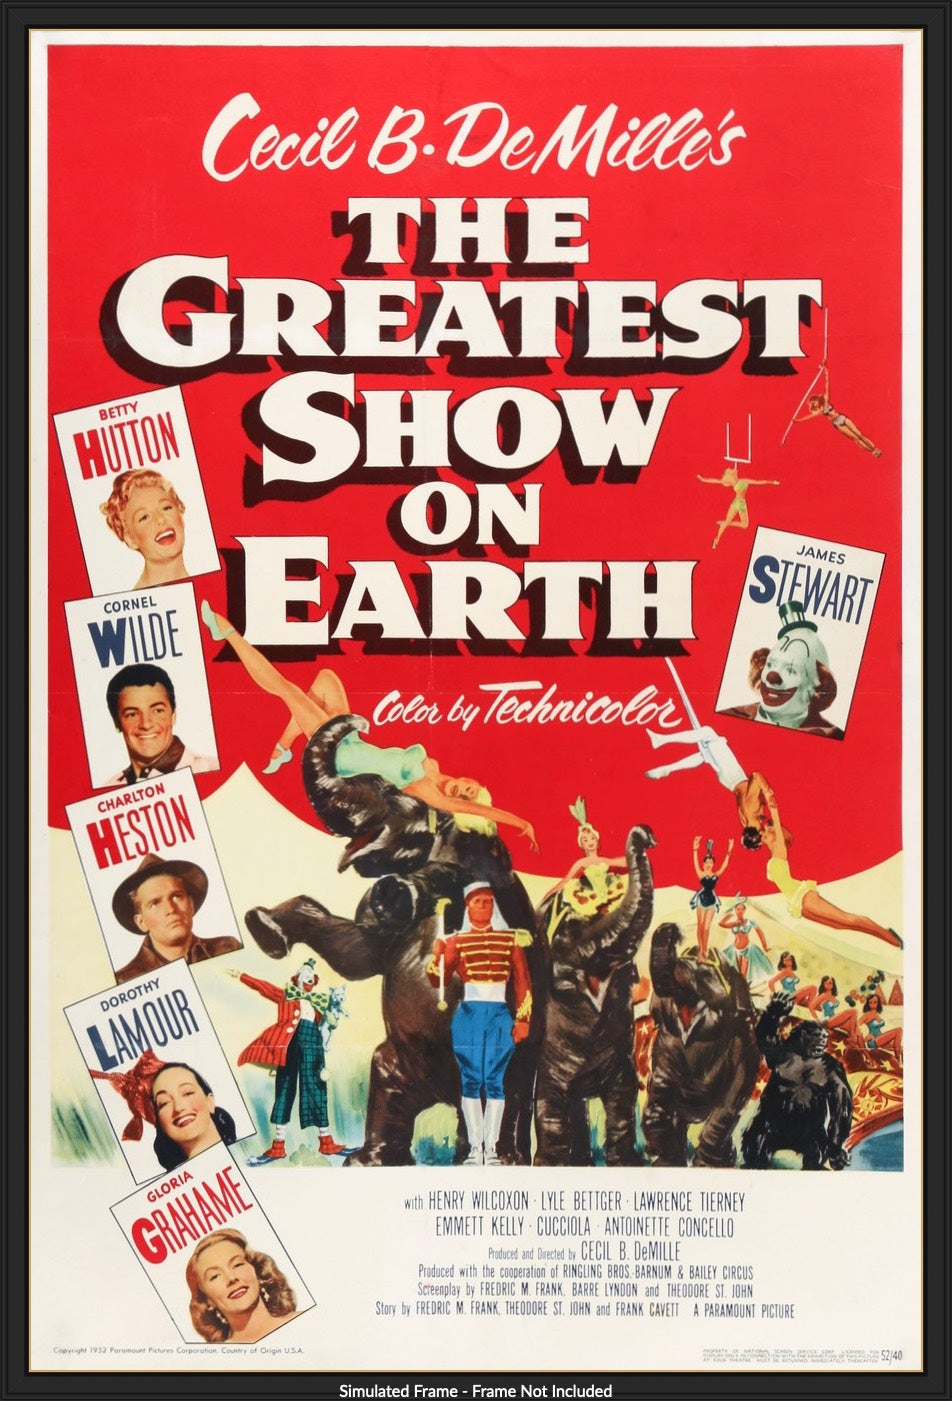 Greatest Show on Earth (1952) original movie poster for sale at Original Film Art